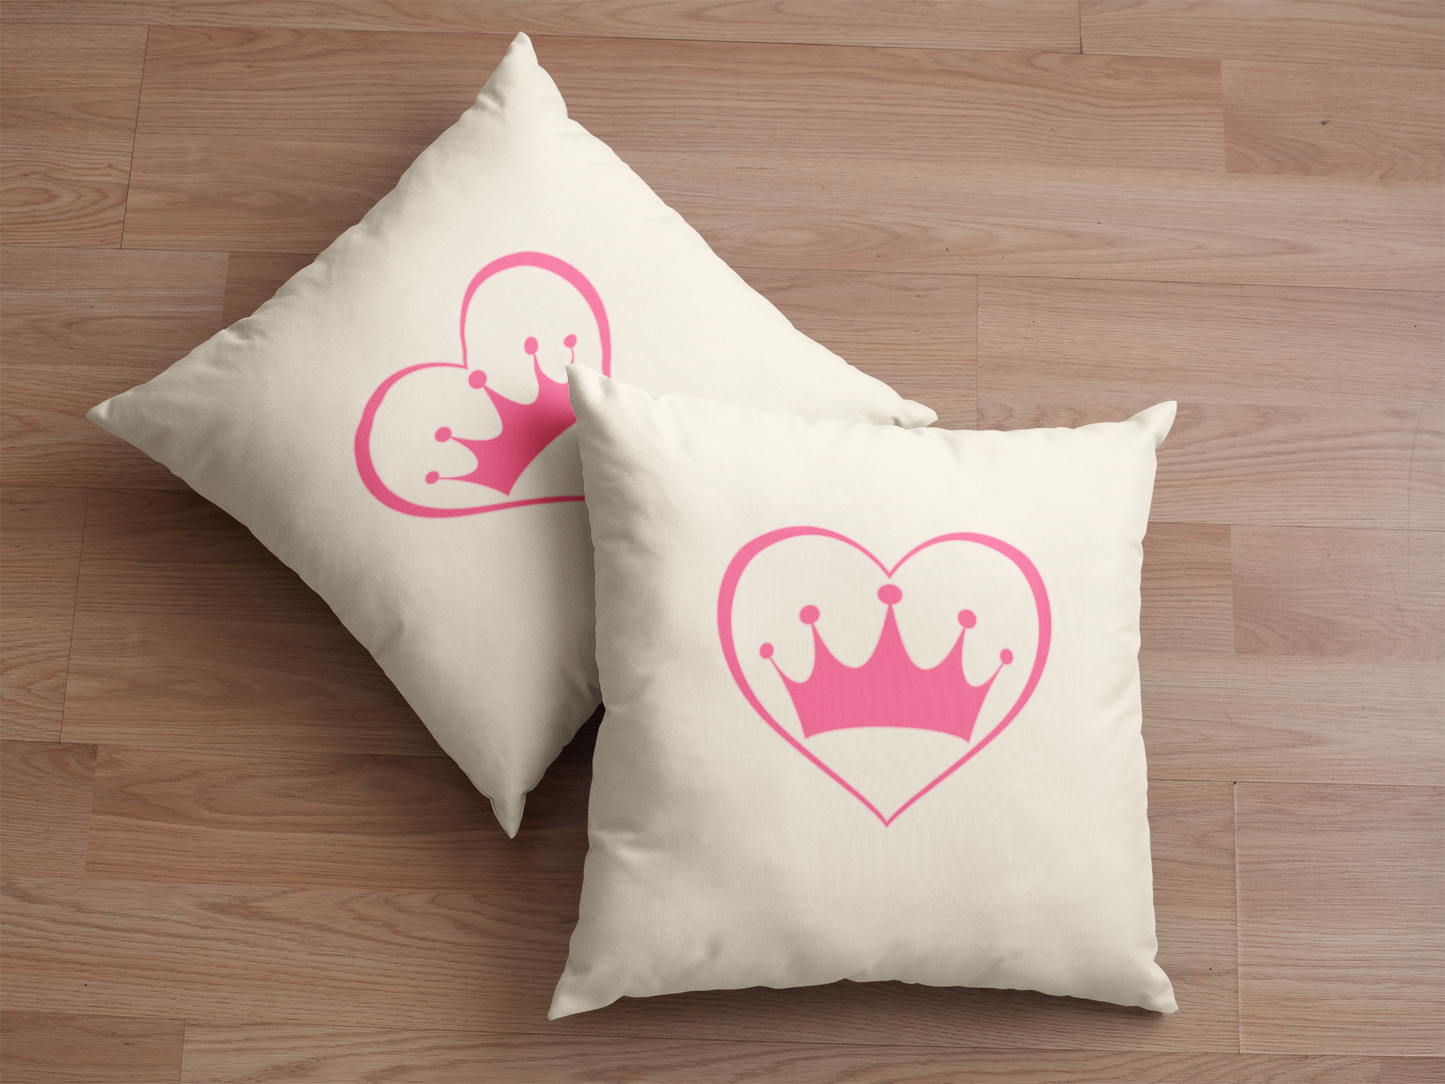 Cushion Cover - Crowned Heart